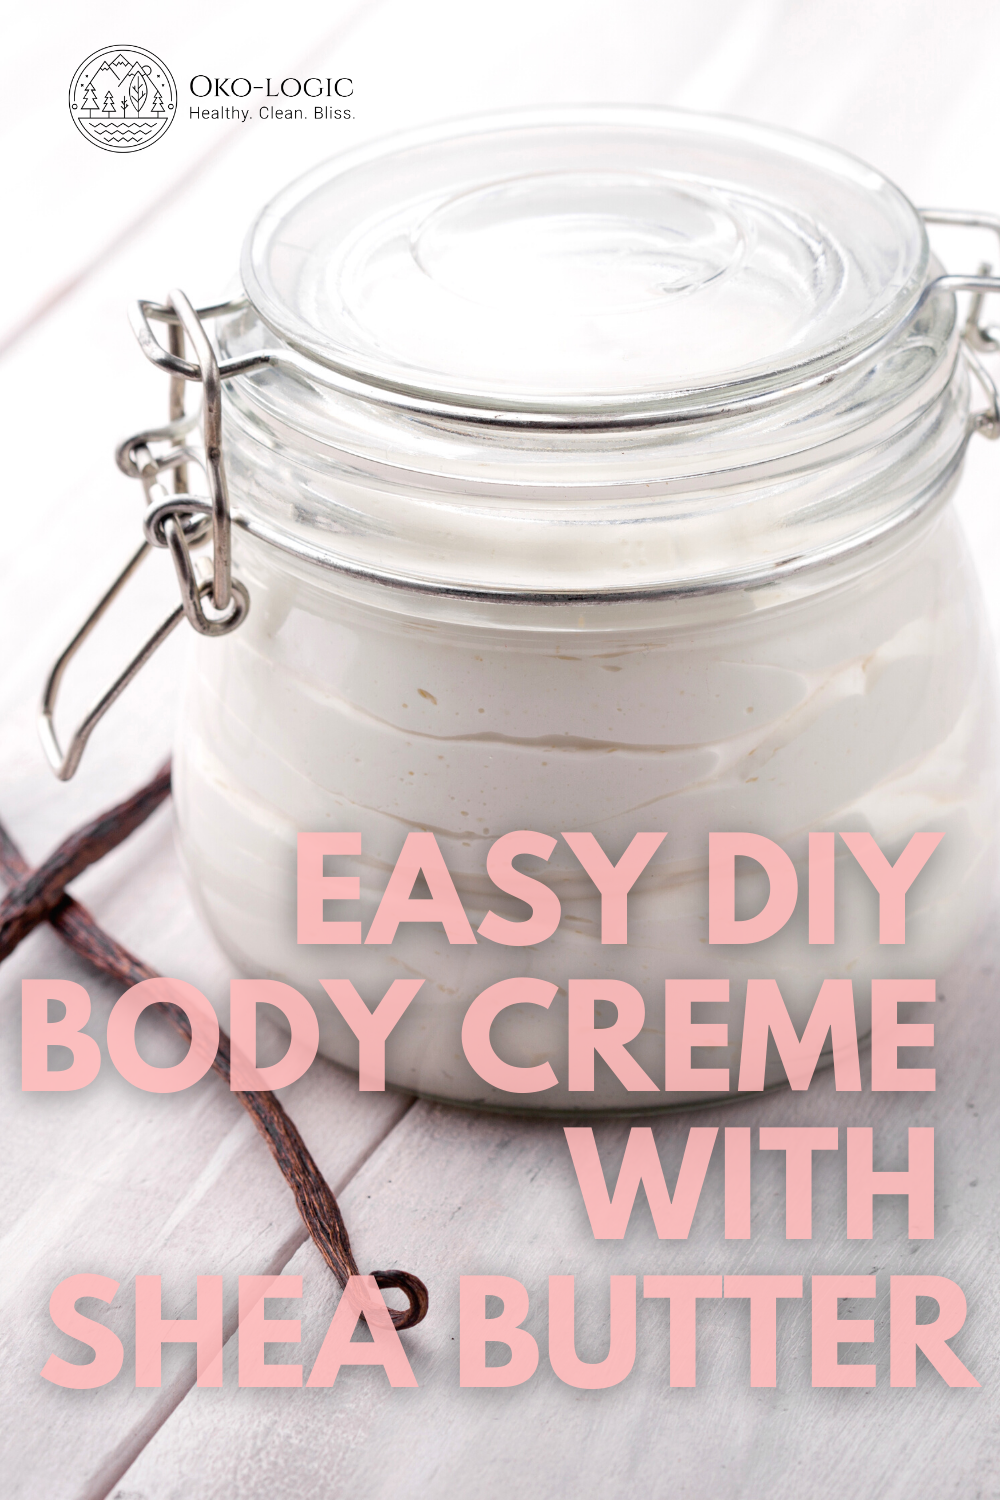 4 Ingredients Soft Non-Greasy Shea Butter and Coconut Oil Body Crème